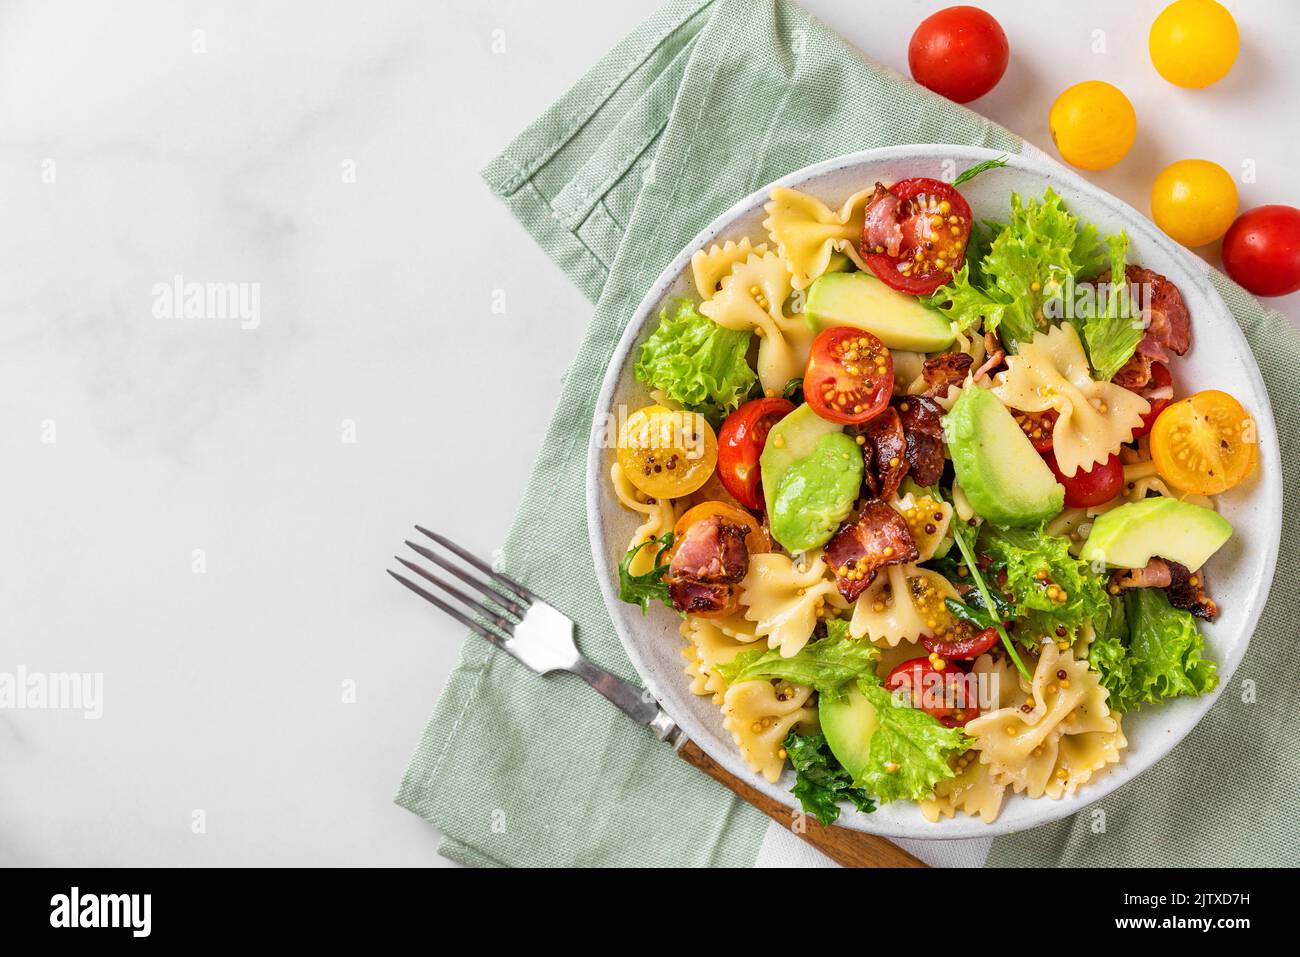 Cold summer pasta salad with bacon, tomatoes, avocado and mustard in a plate with fork on white background. Top view. Healthy diet food Stock Photo